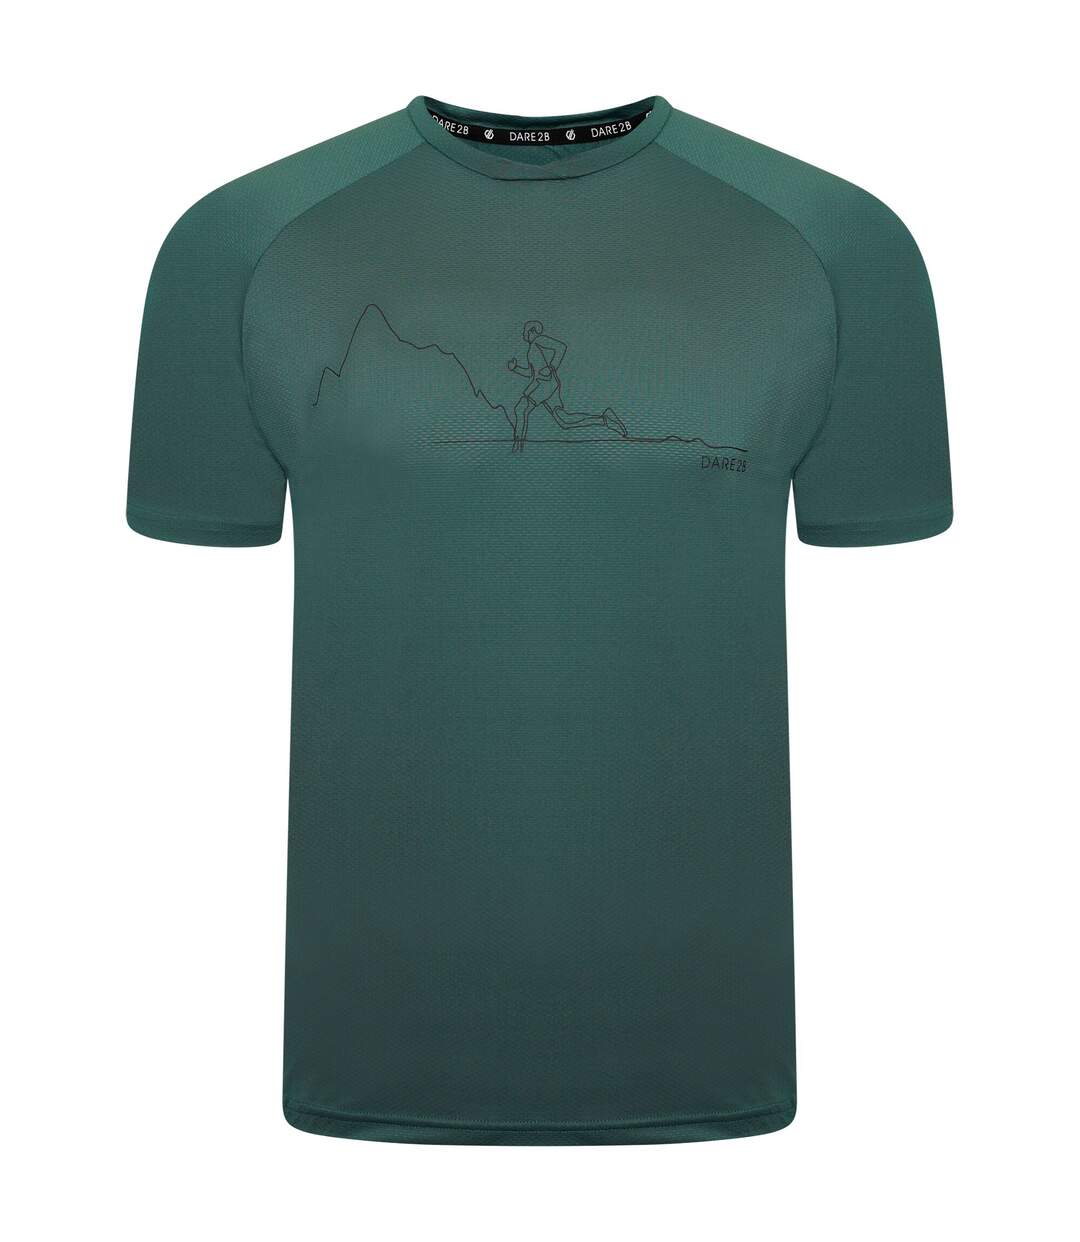 Dare 2B Mens Righteous II Illustration Recycled Lightweight T-Shirt (Fern Green)